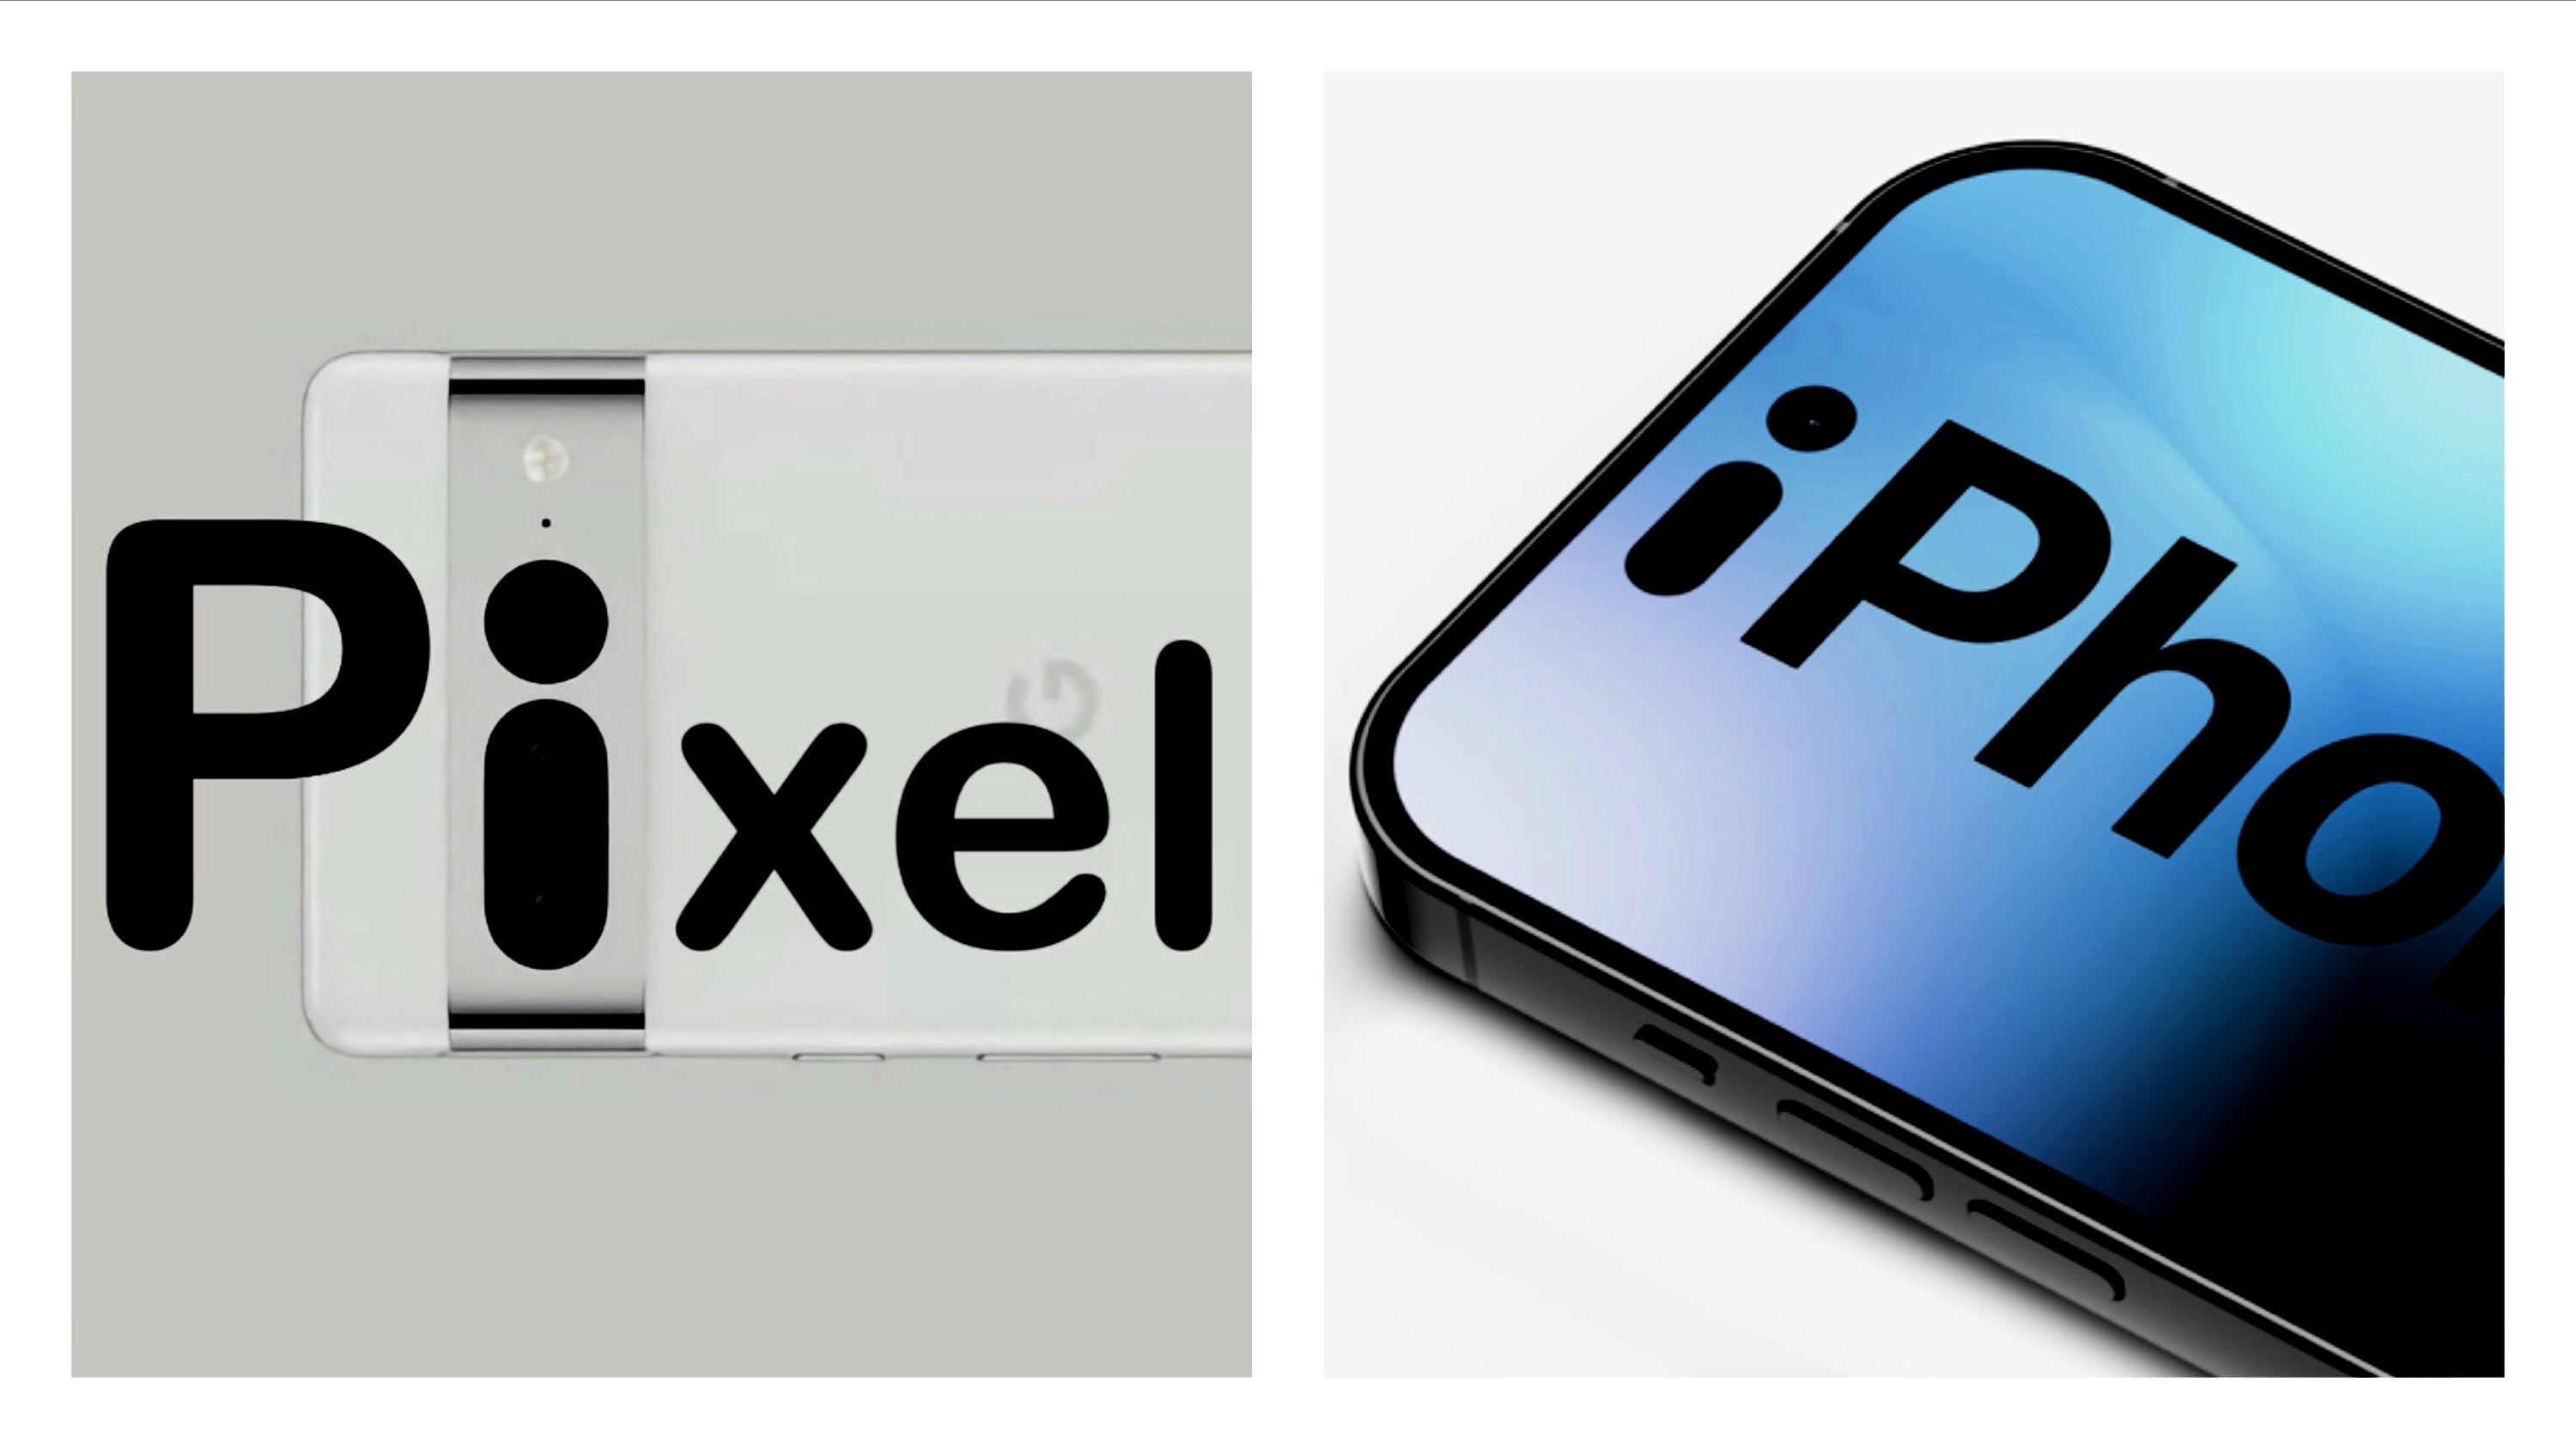 Shockingly similar iPhone 14 Pro and Pixel 7 Pro designs not a coincidence: Is Google copying Apple?